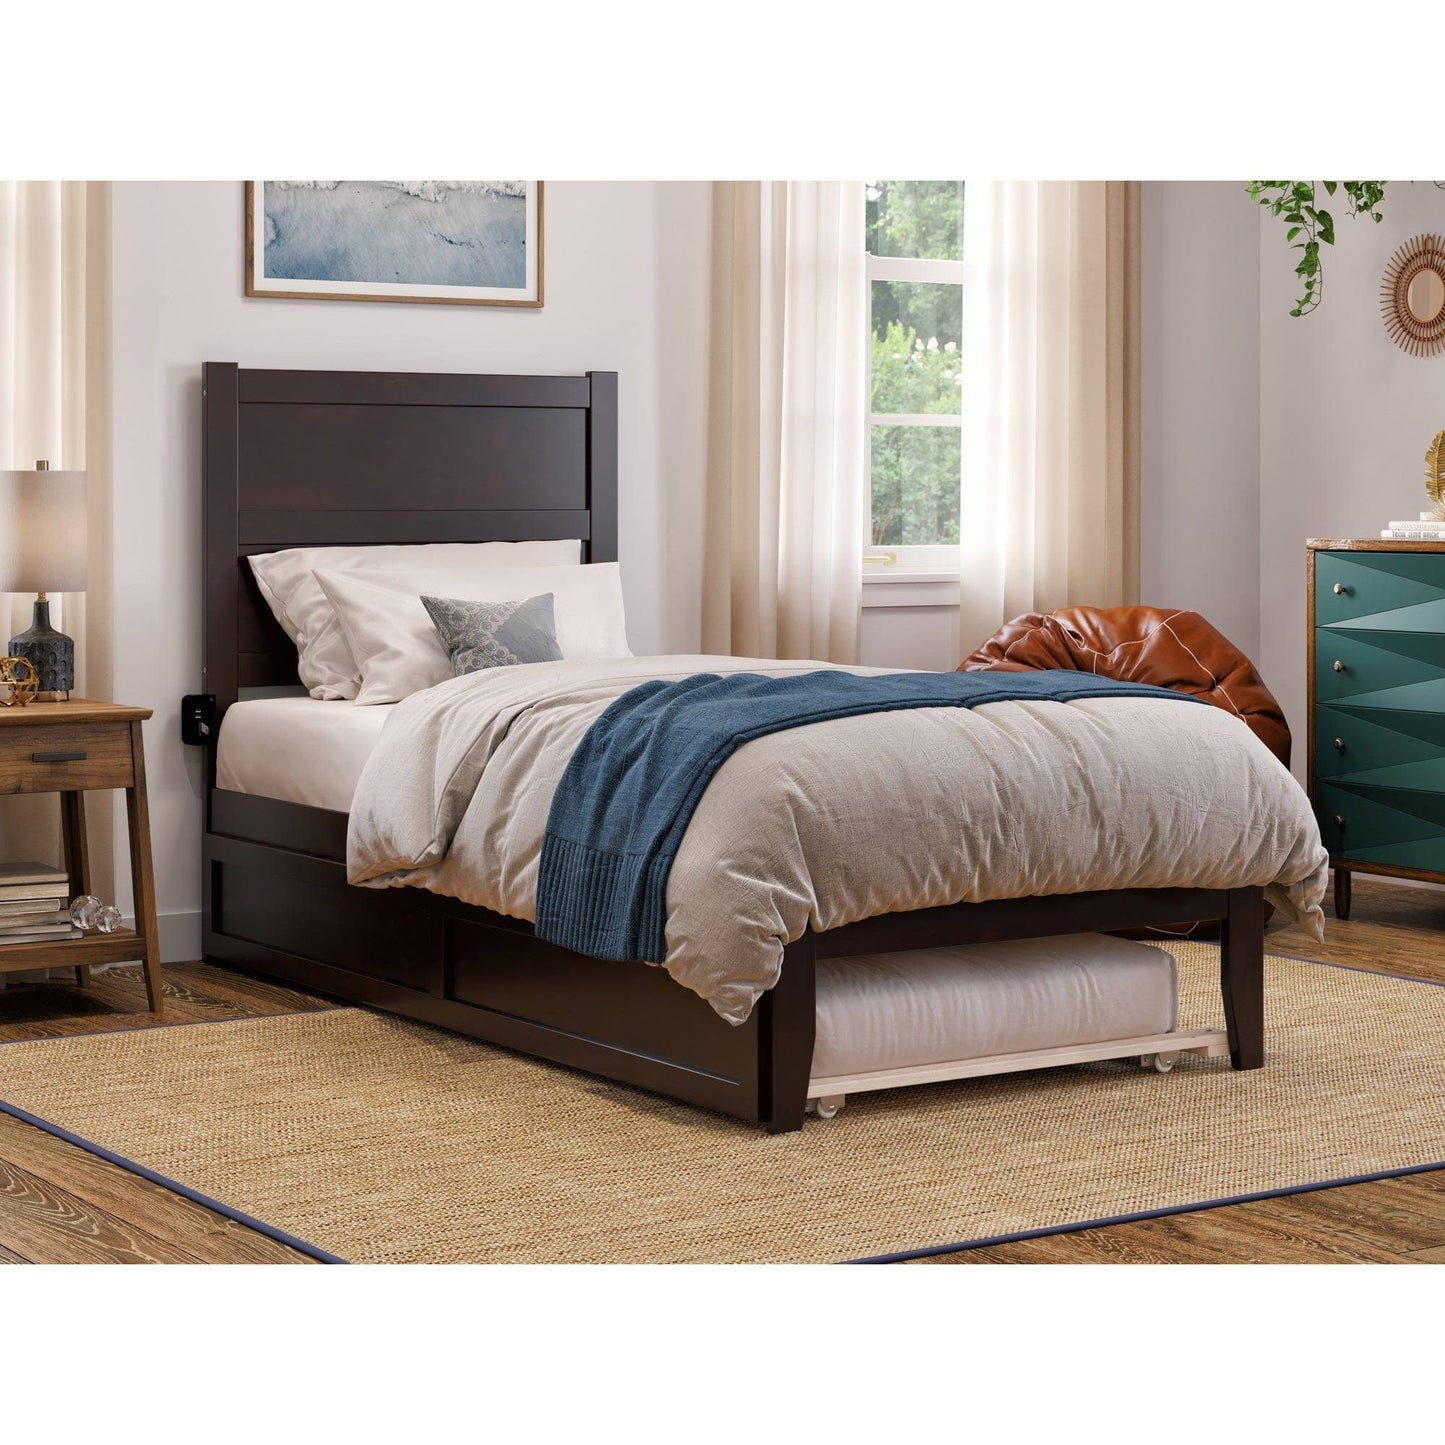 AFI Furnishings NoHo Twin Extra Long Bed with Twin Extra Long Trundle in Espresso AG9111111